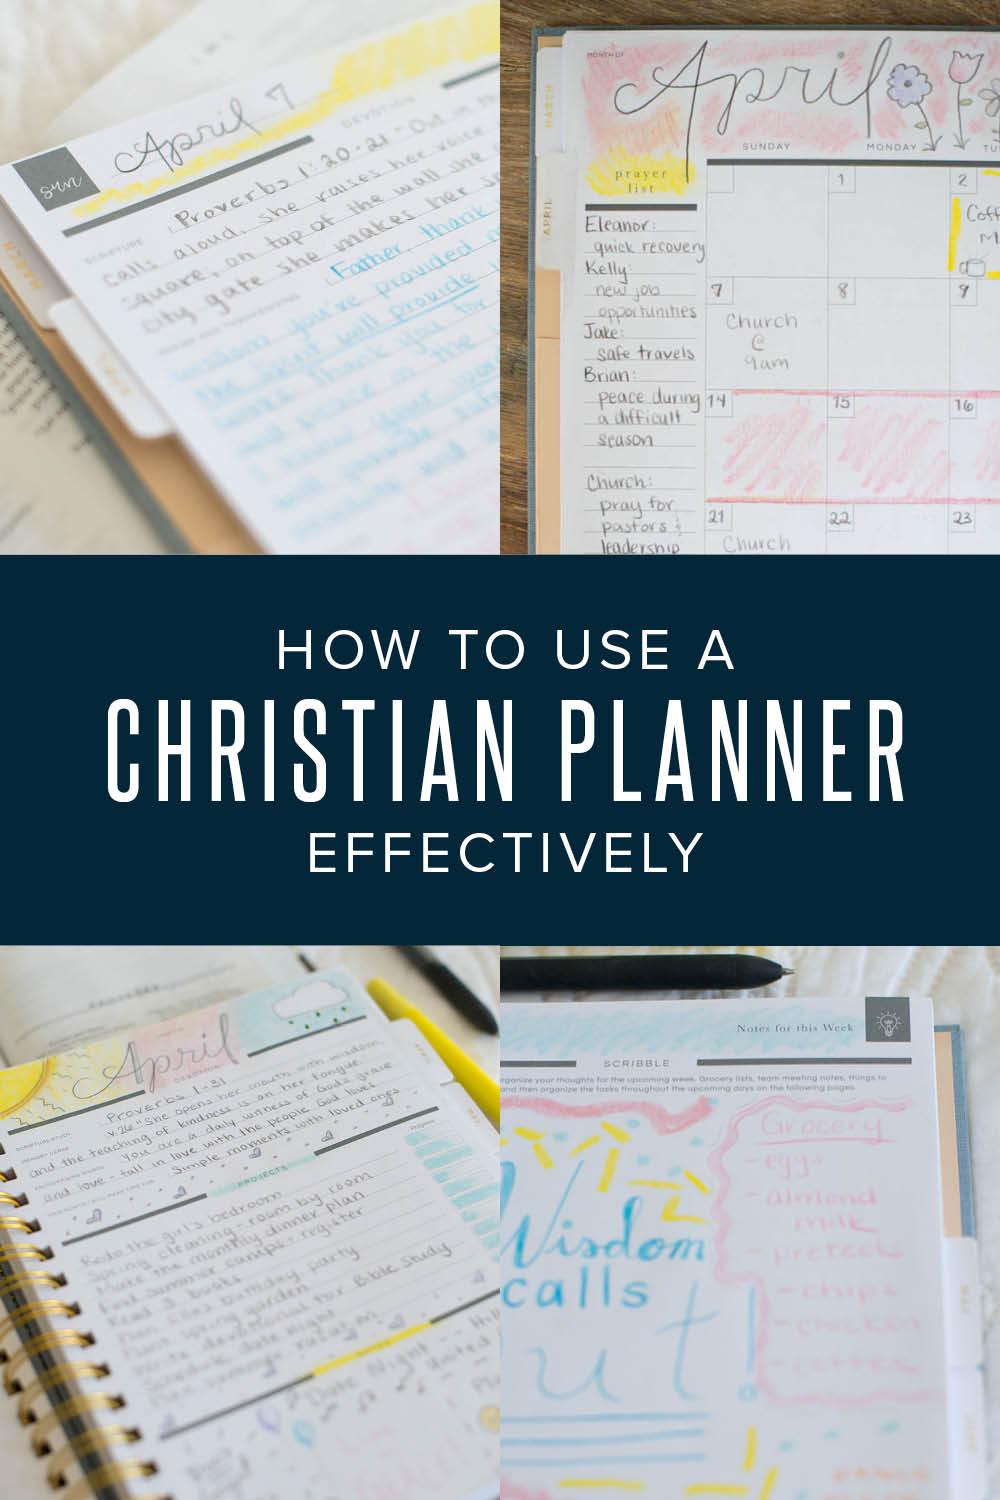 tips on how to use a Christian planner effectively